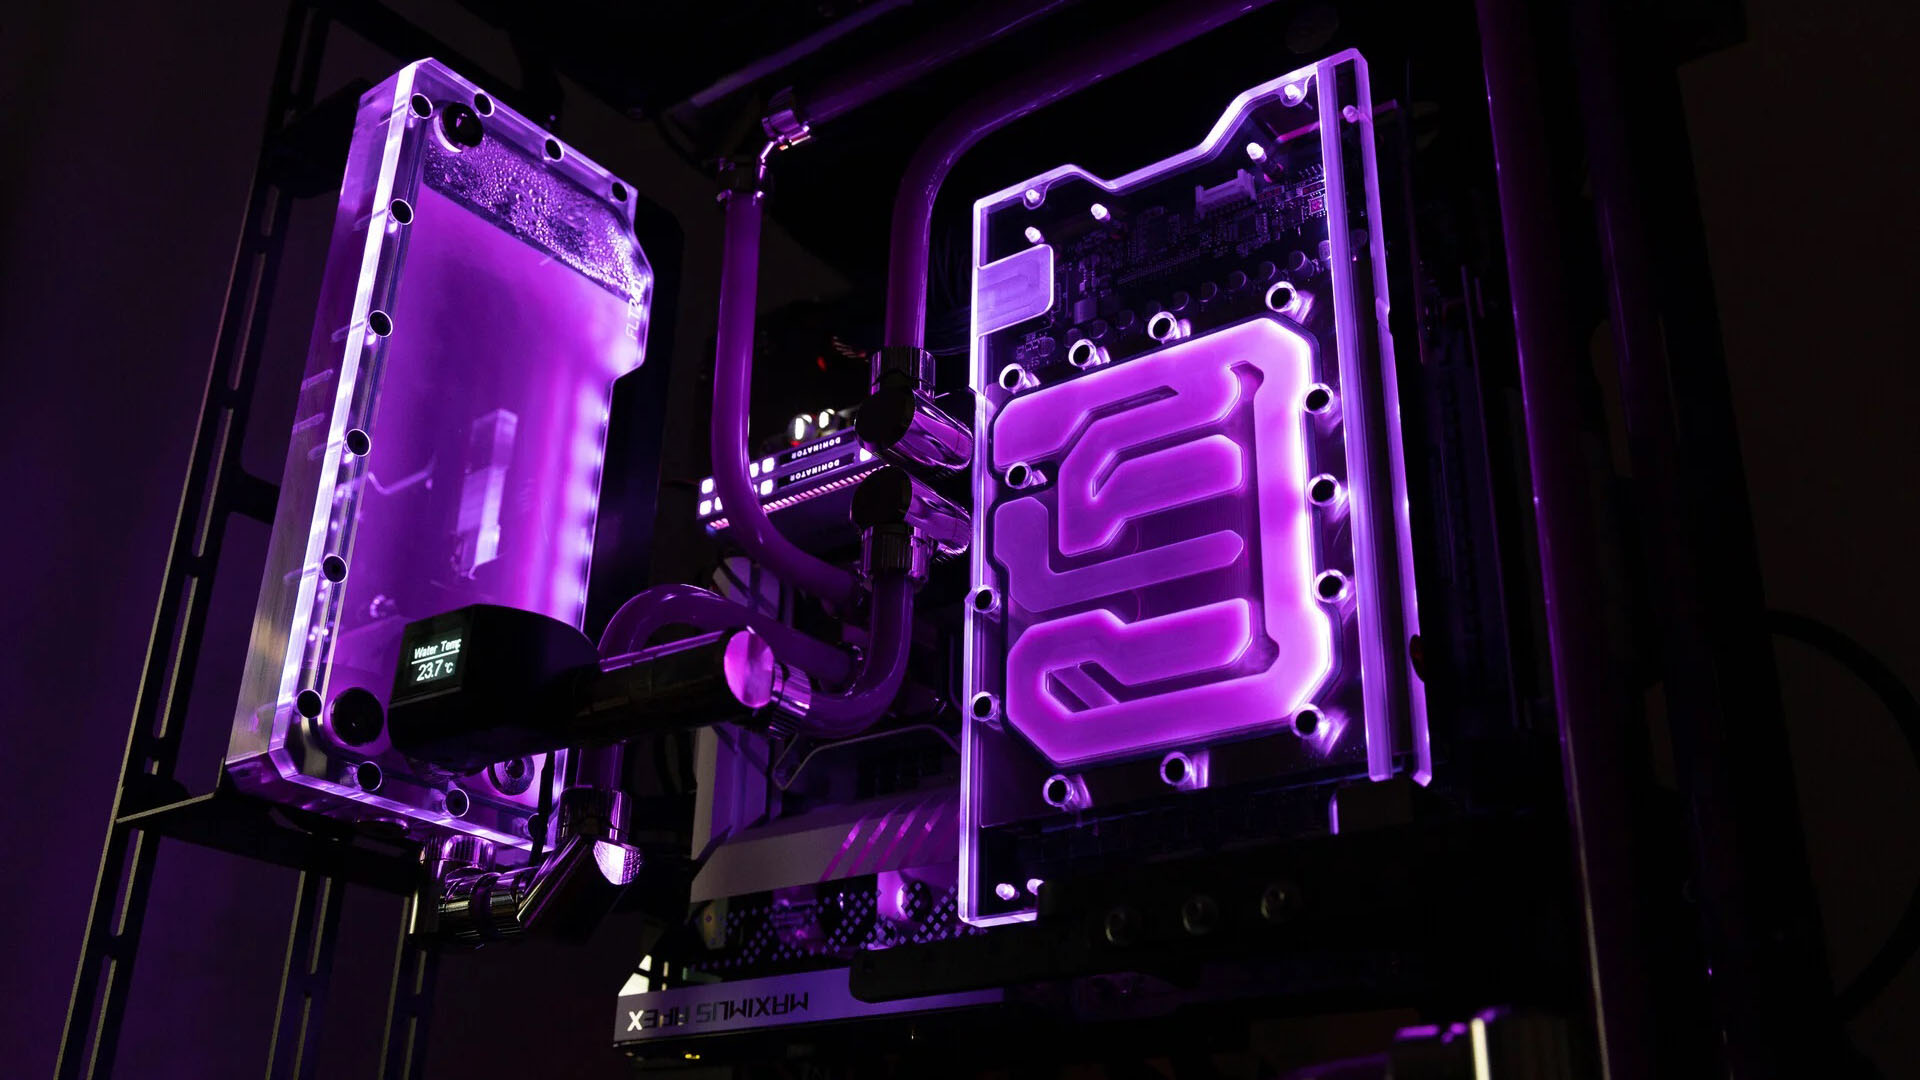 The RGB-lit water-cooled gaming PC in an open-air case